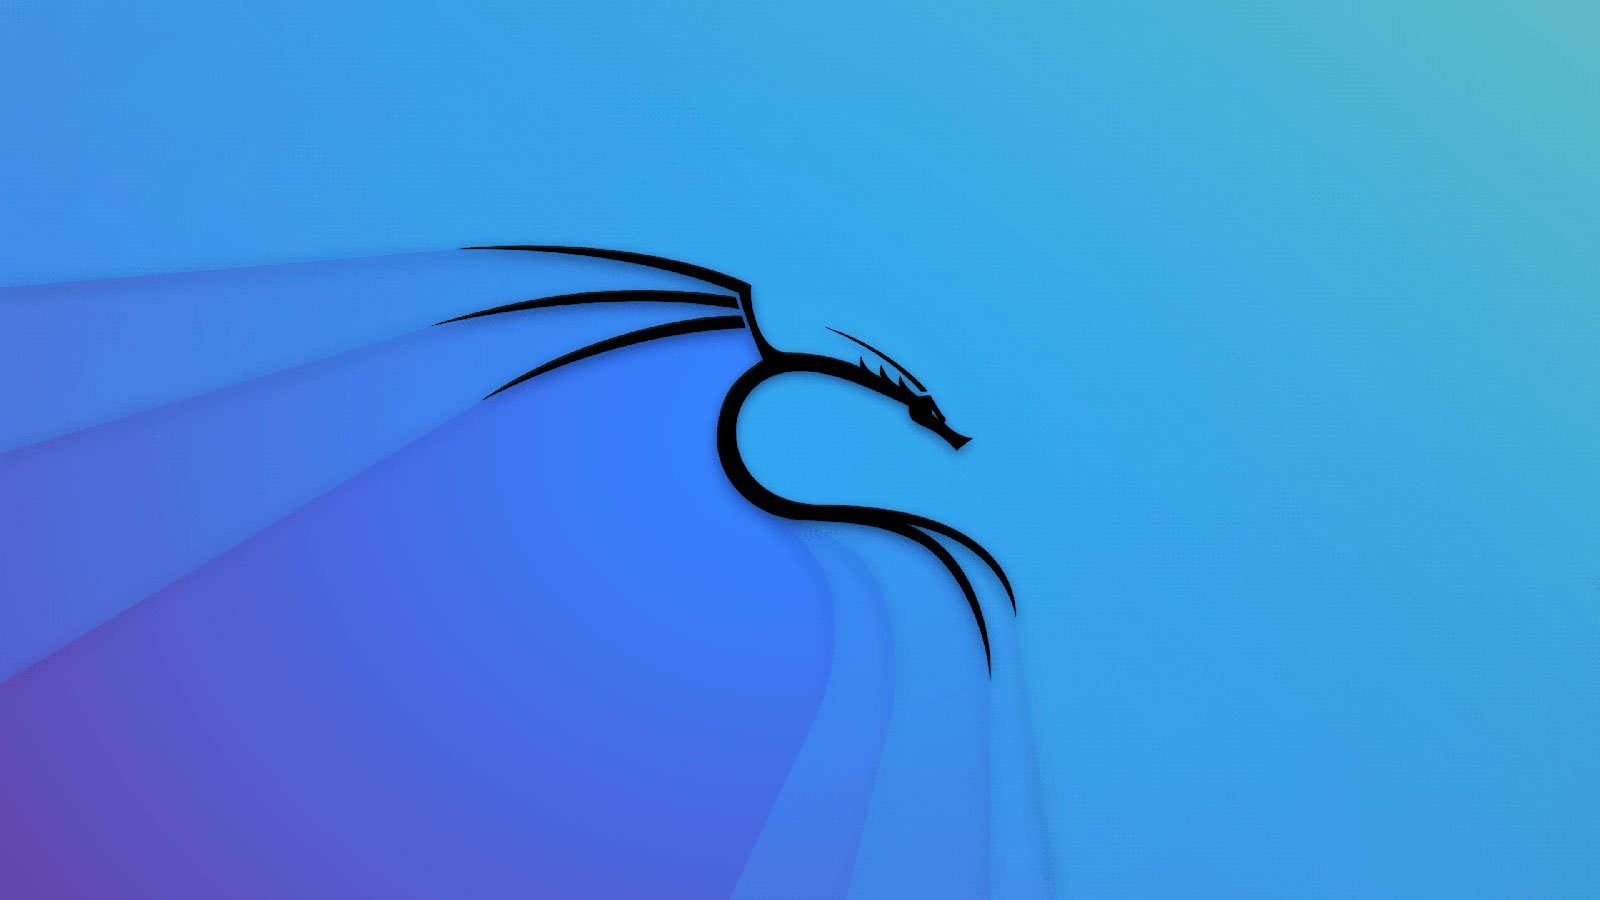 Kali Linux  released with 6 new tools, SSH wide compat, and more